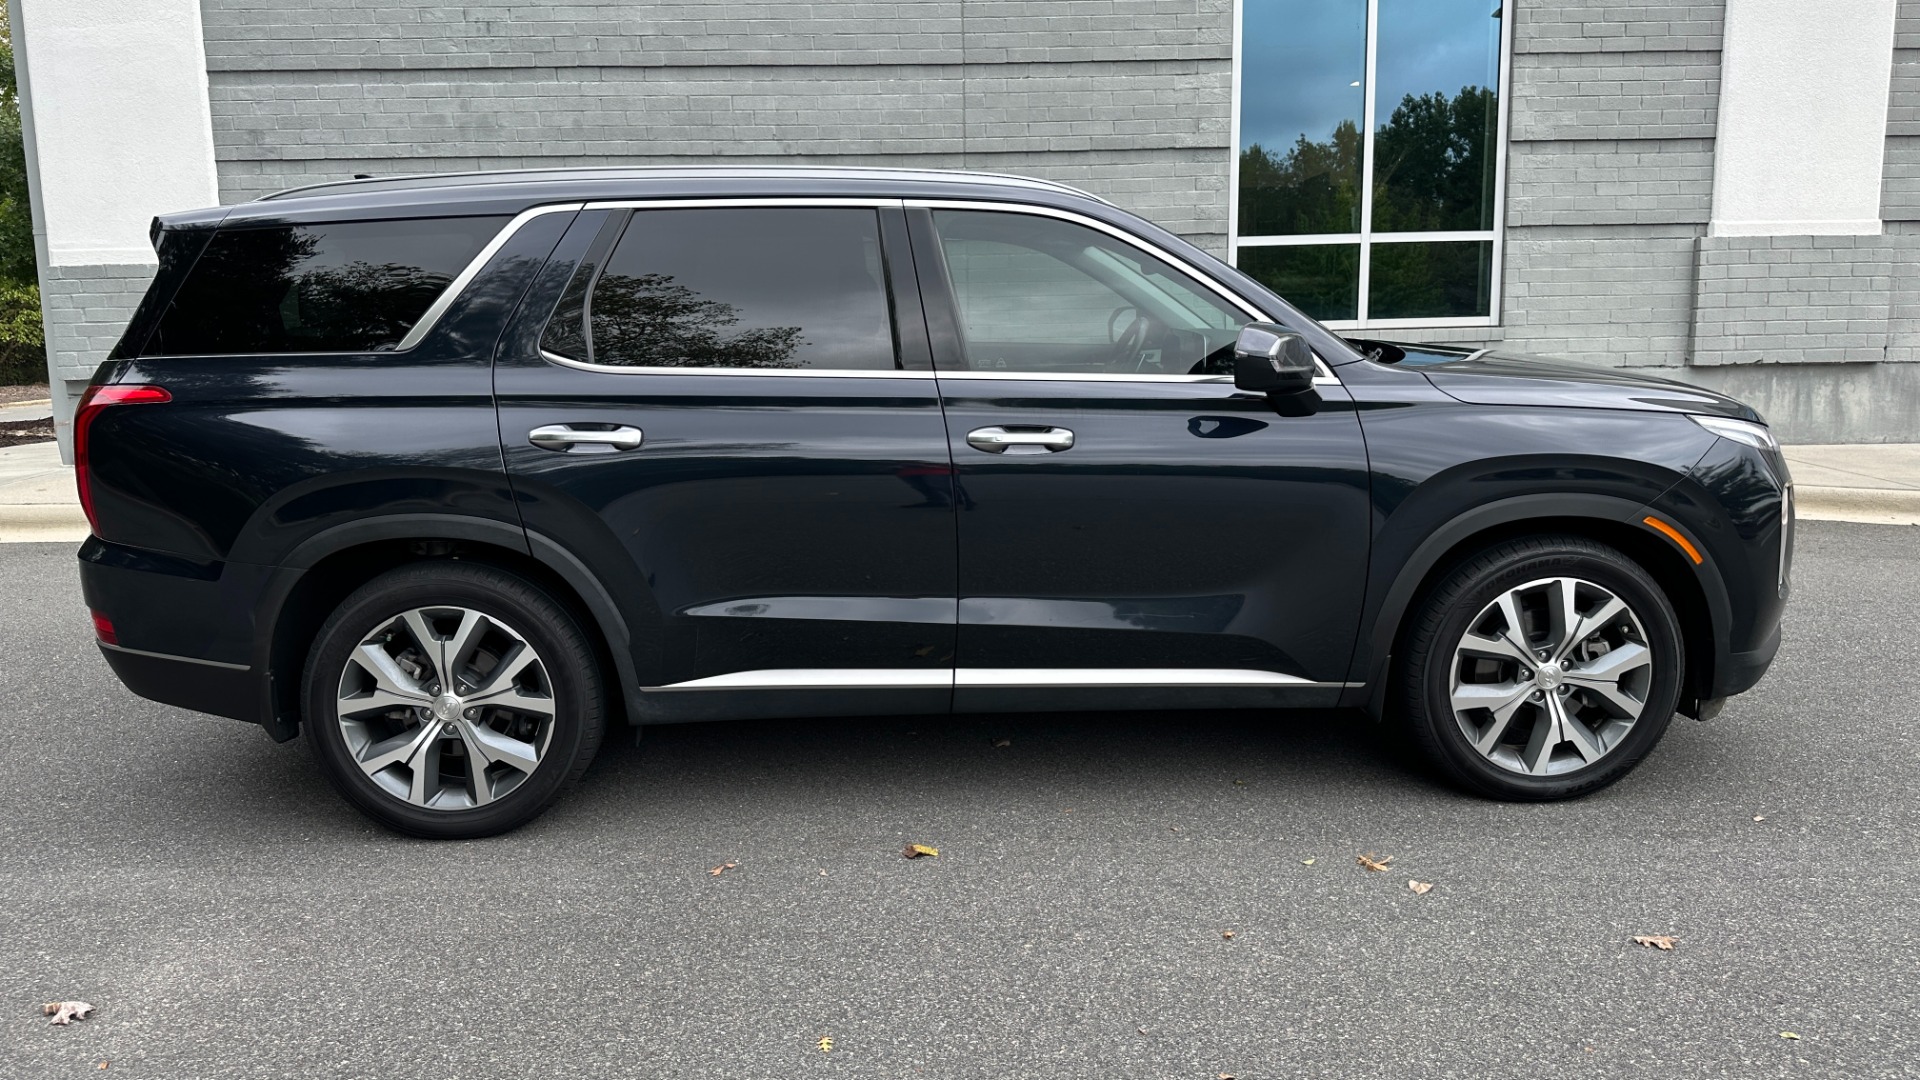 Used 2020 Hyundai Palisade SEL / CONVENIENCE / PREMIUM / SUNROOF / DRIVE GUIDANCE for sale $30,995 at Formula Imports in Charlotte NC 28227 3